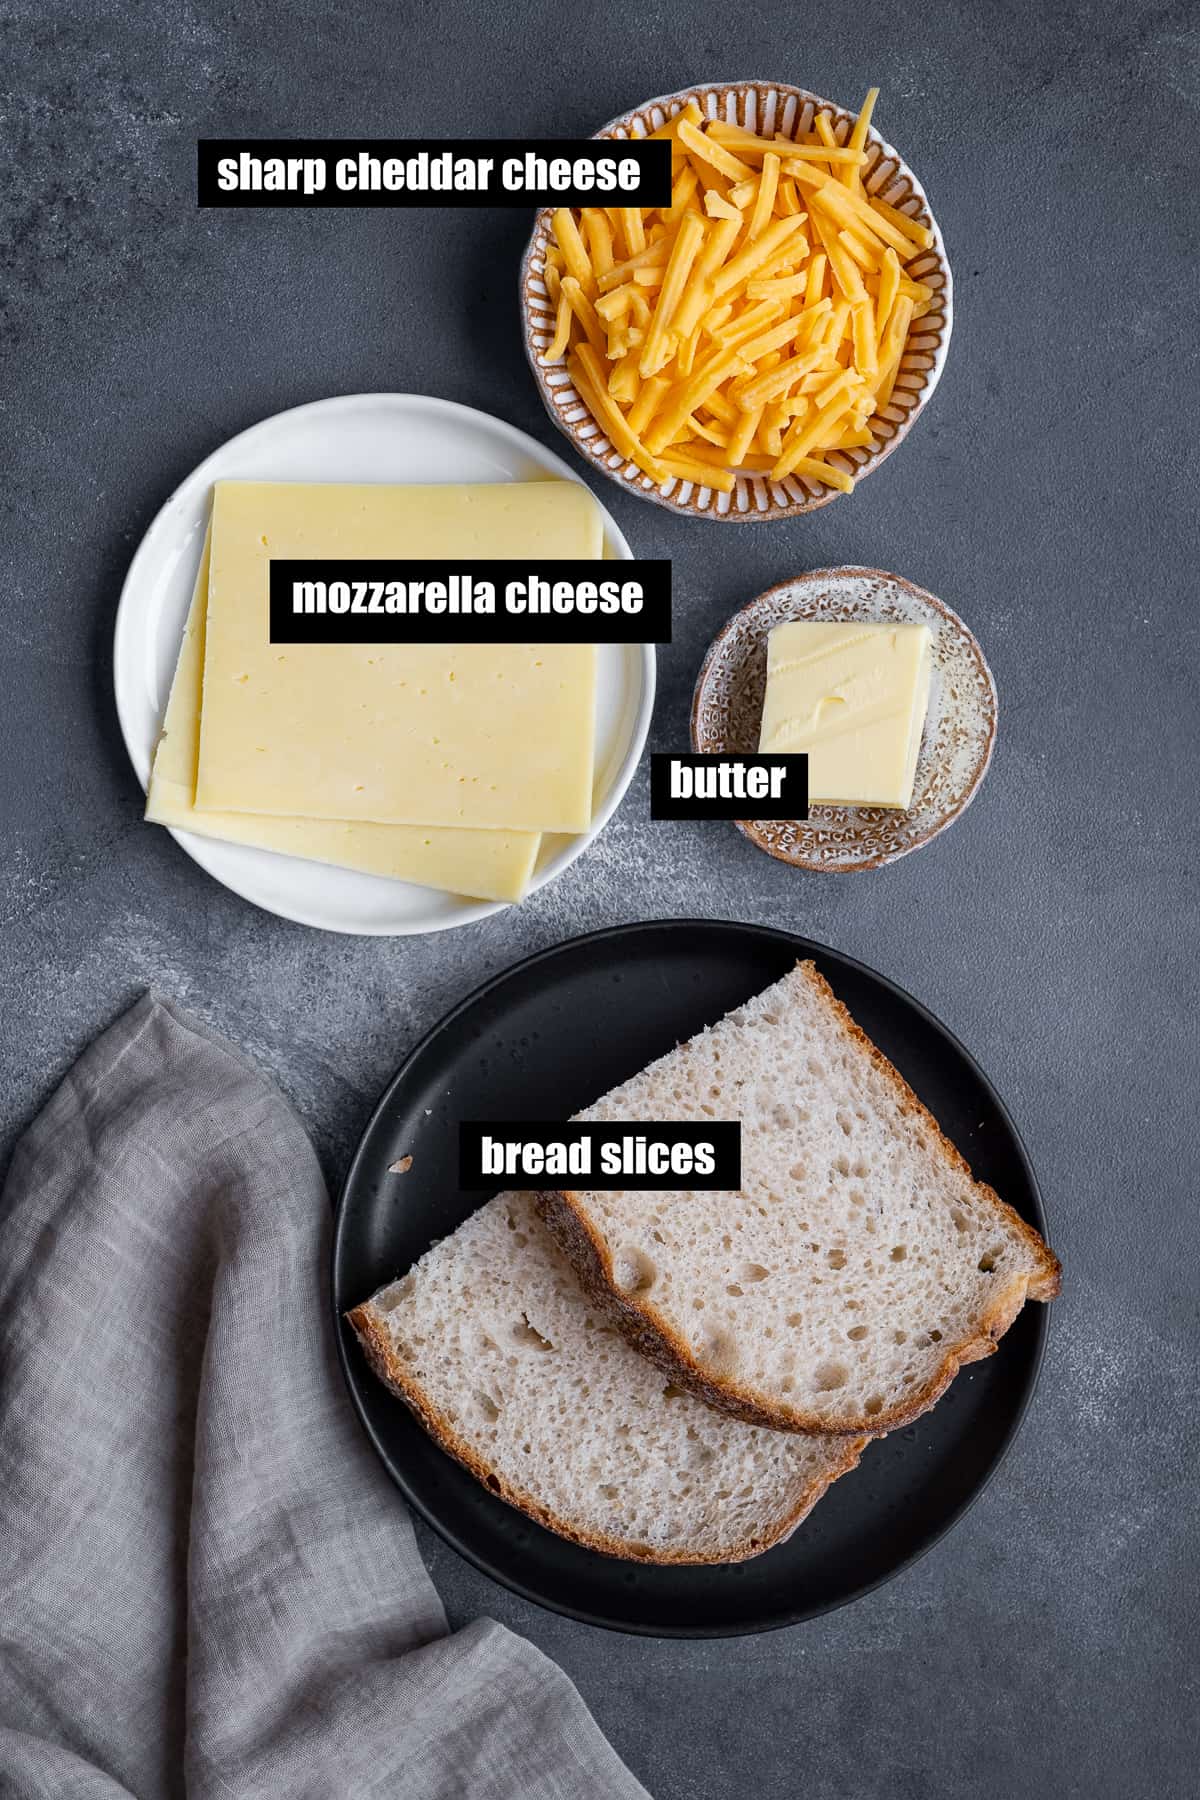 Cheese slices, shredded cheese, butter and bread slices on a dark background.